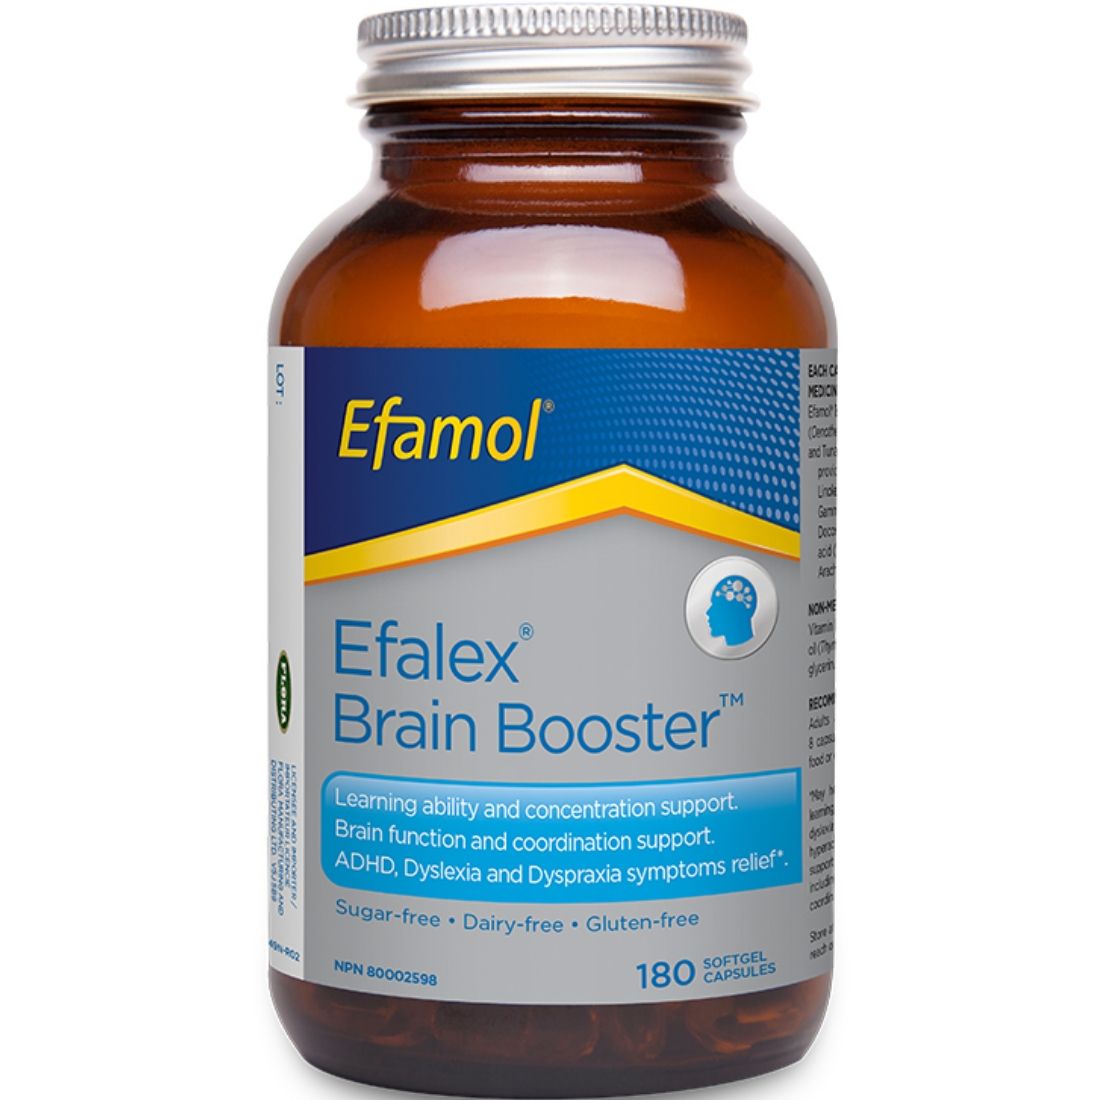 Efamol Efalex Brain Booster, Learning Ability and Concentration Support (ADHD, Dyslexia, Dyspraxia Relief)